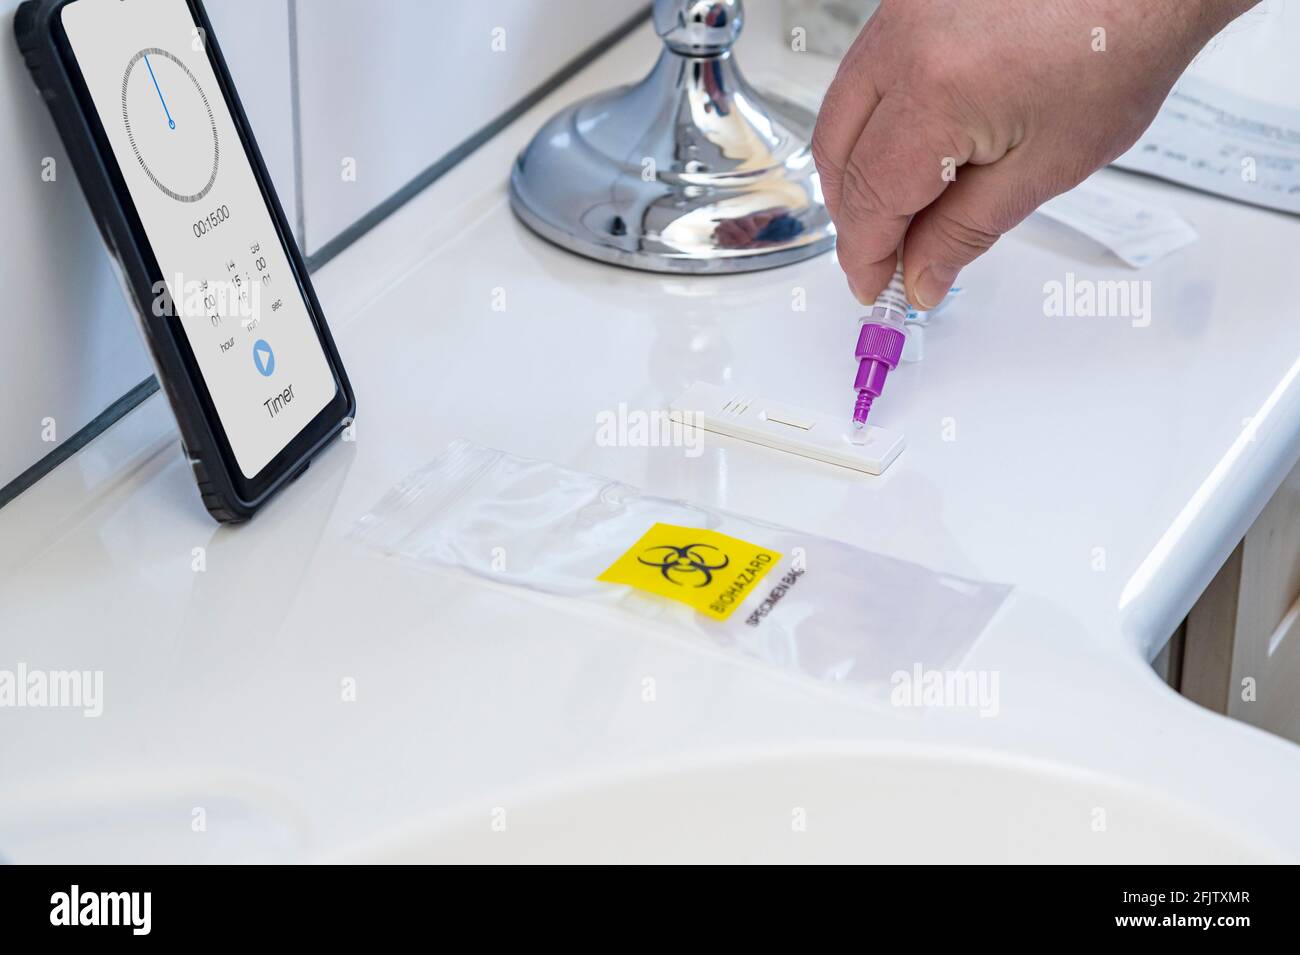 A man performs a Corona self-test. In the kit for SARS CoV-2 antigen test, he drips the test liquid onto the test strip. He is in a bathroom. A smartp Stock Photo